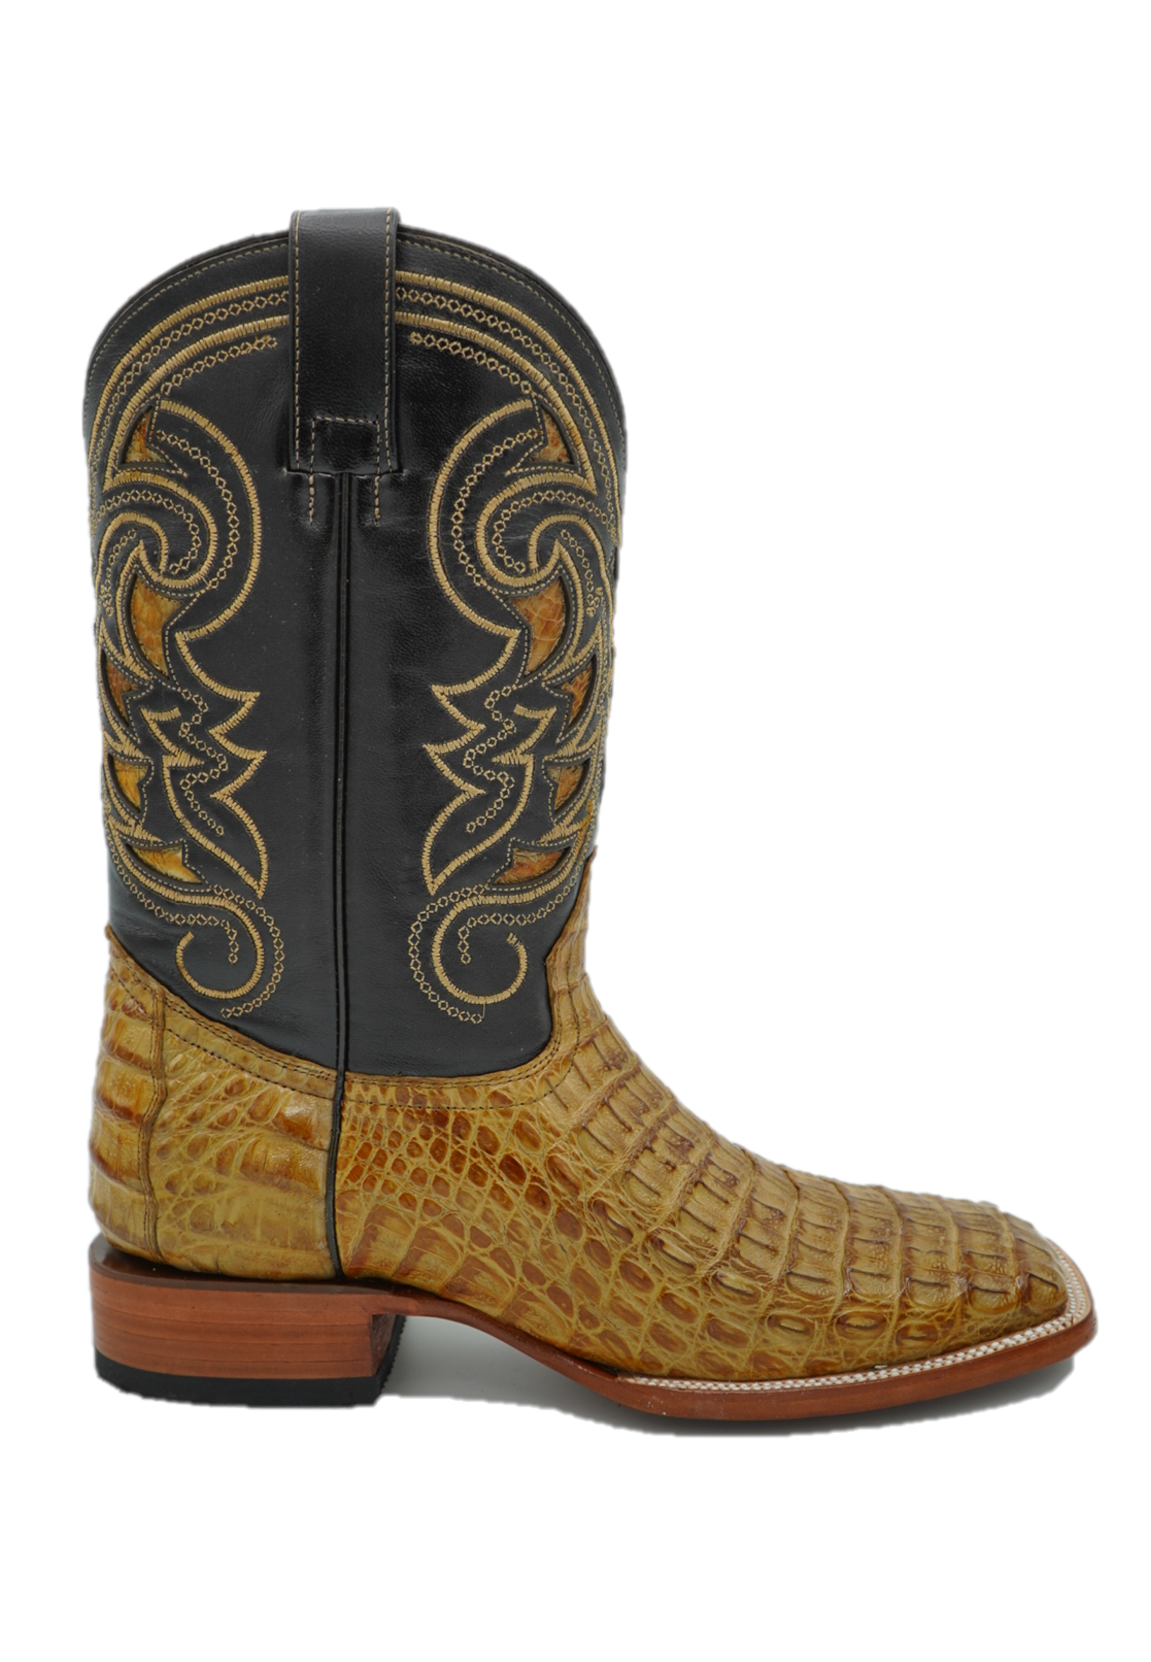 Caiman Back Wide Square Toe Boot in Tan